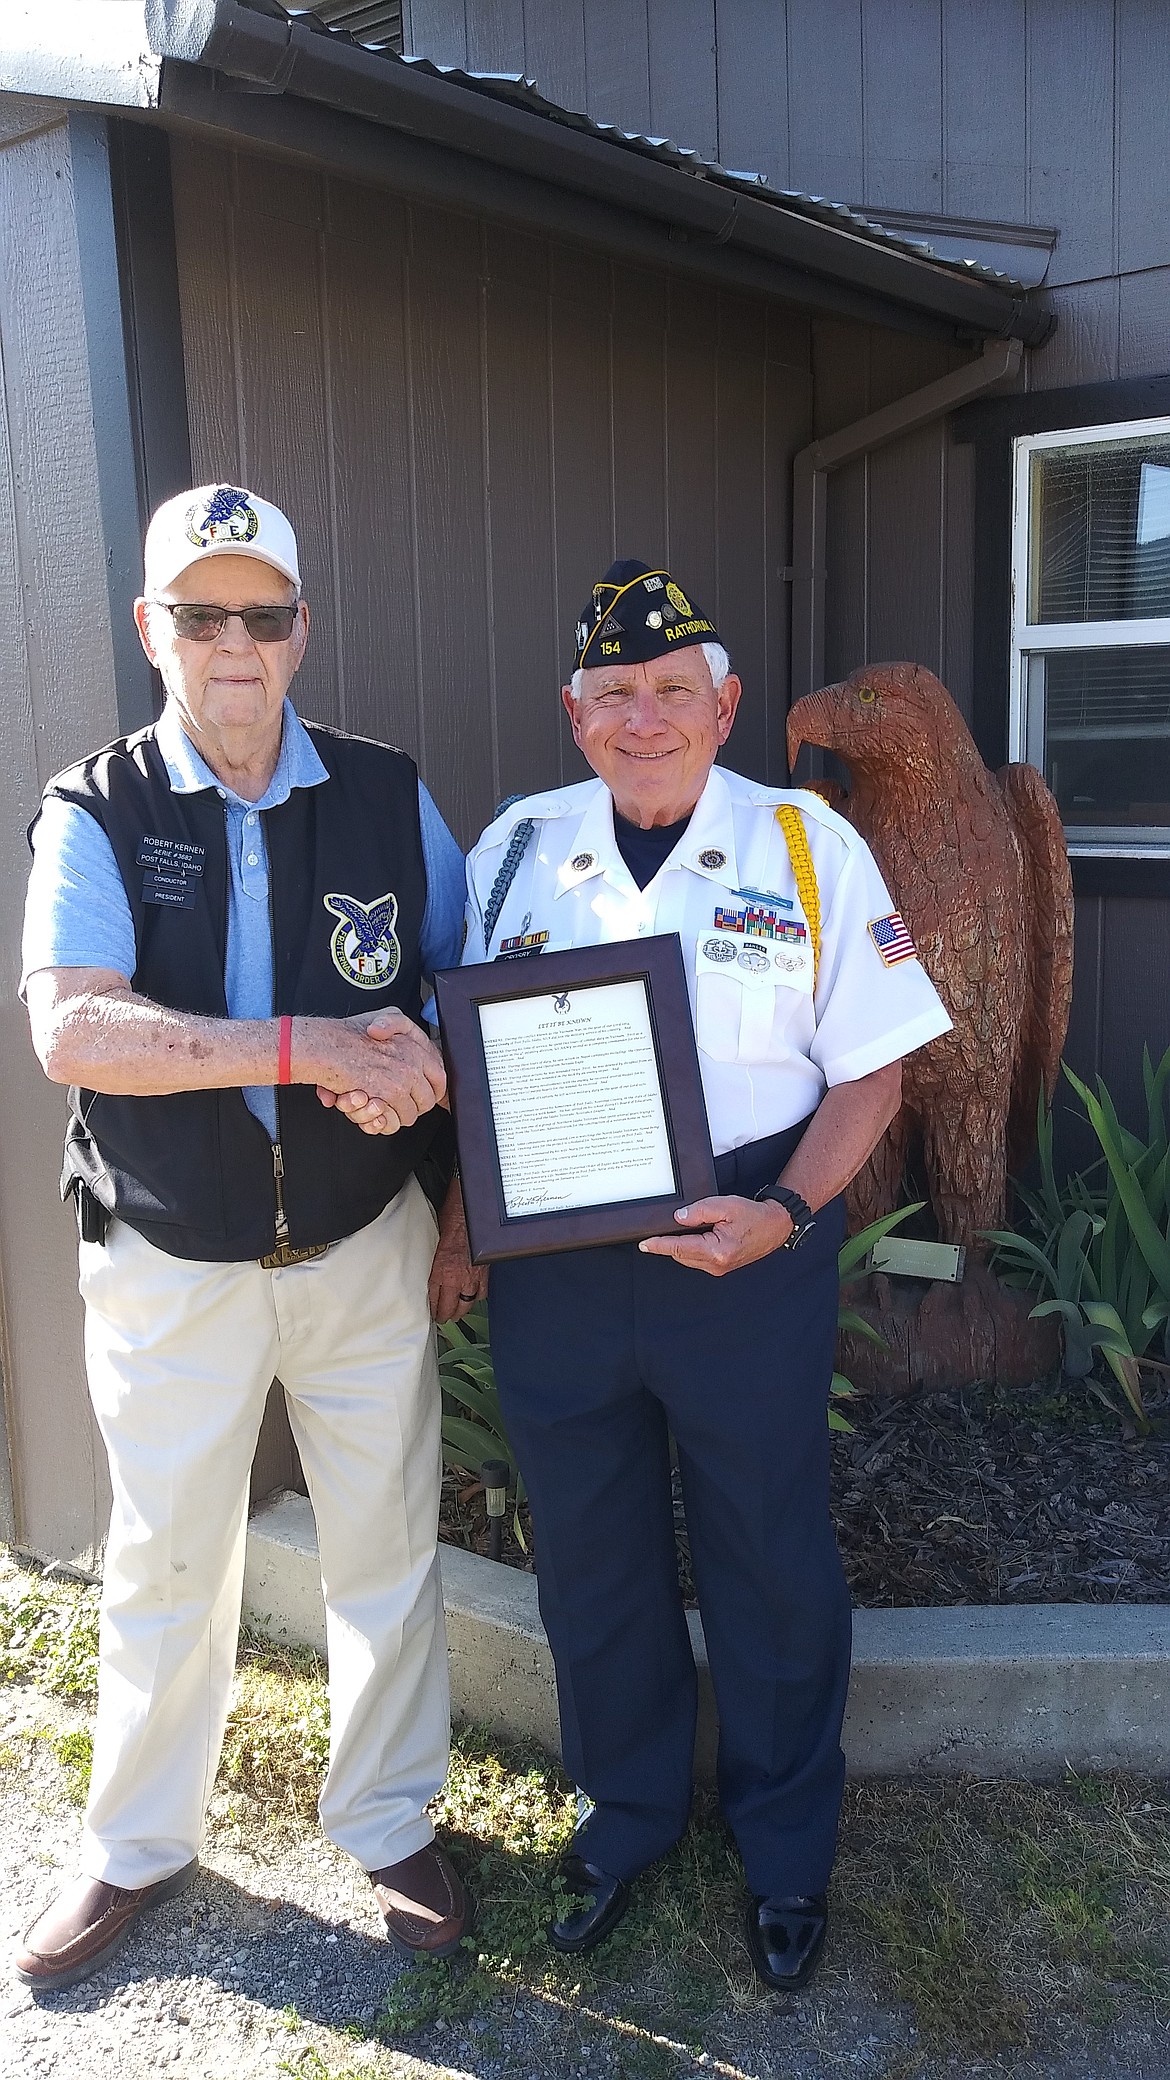 During the ceremony, Len Crosby was honored with an Honorary Life Membership to the Post Falls Eagles No. 3682. Following lengthy research, a resolution for that event was sent to the Fraternal Order of Eagles in Garden City, Ohio, for their affirmative action, which they passed. Past President of the Post Falls Eagles No. 3682 Dustin Okon, left, presents the resolution to Crosby.